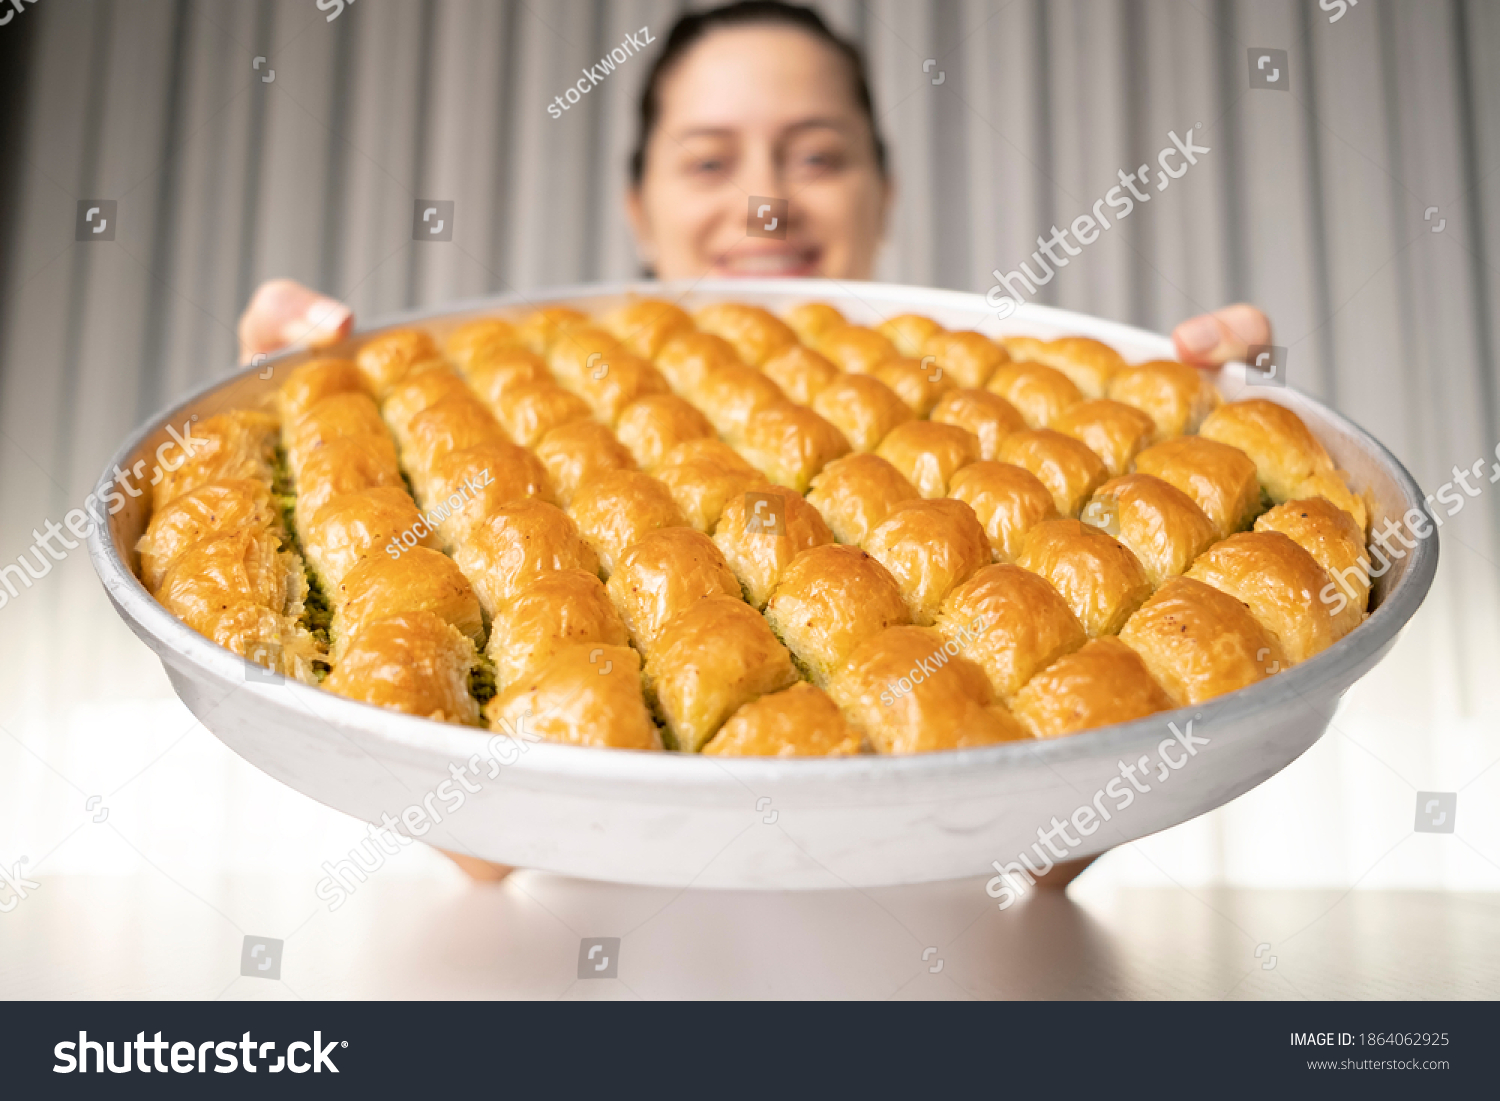 She lifts the tray of baklava dessert in her hand and smiles at the camera deep in the field #1864062925